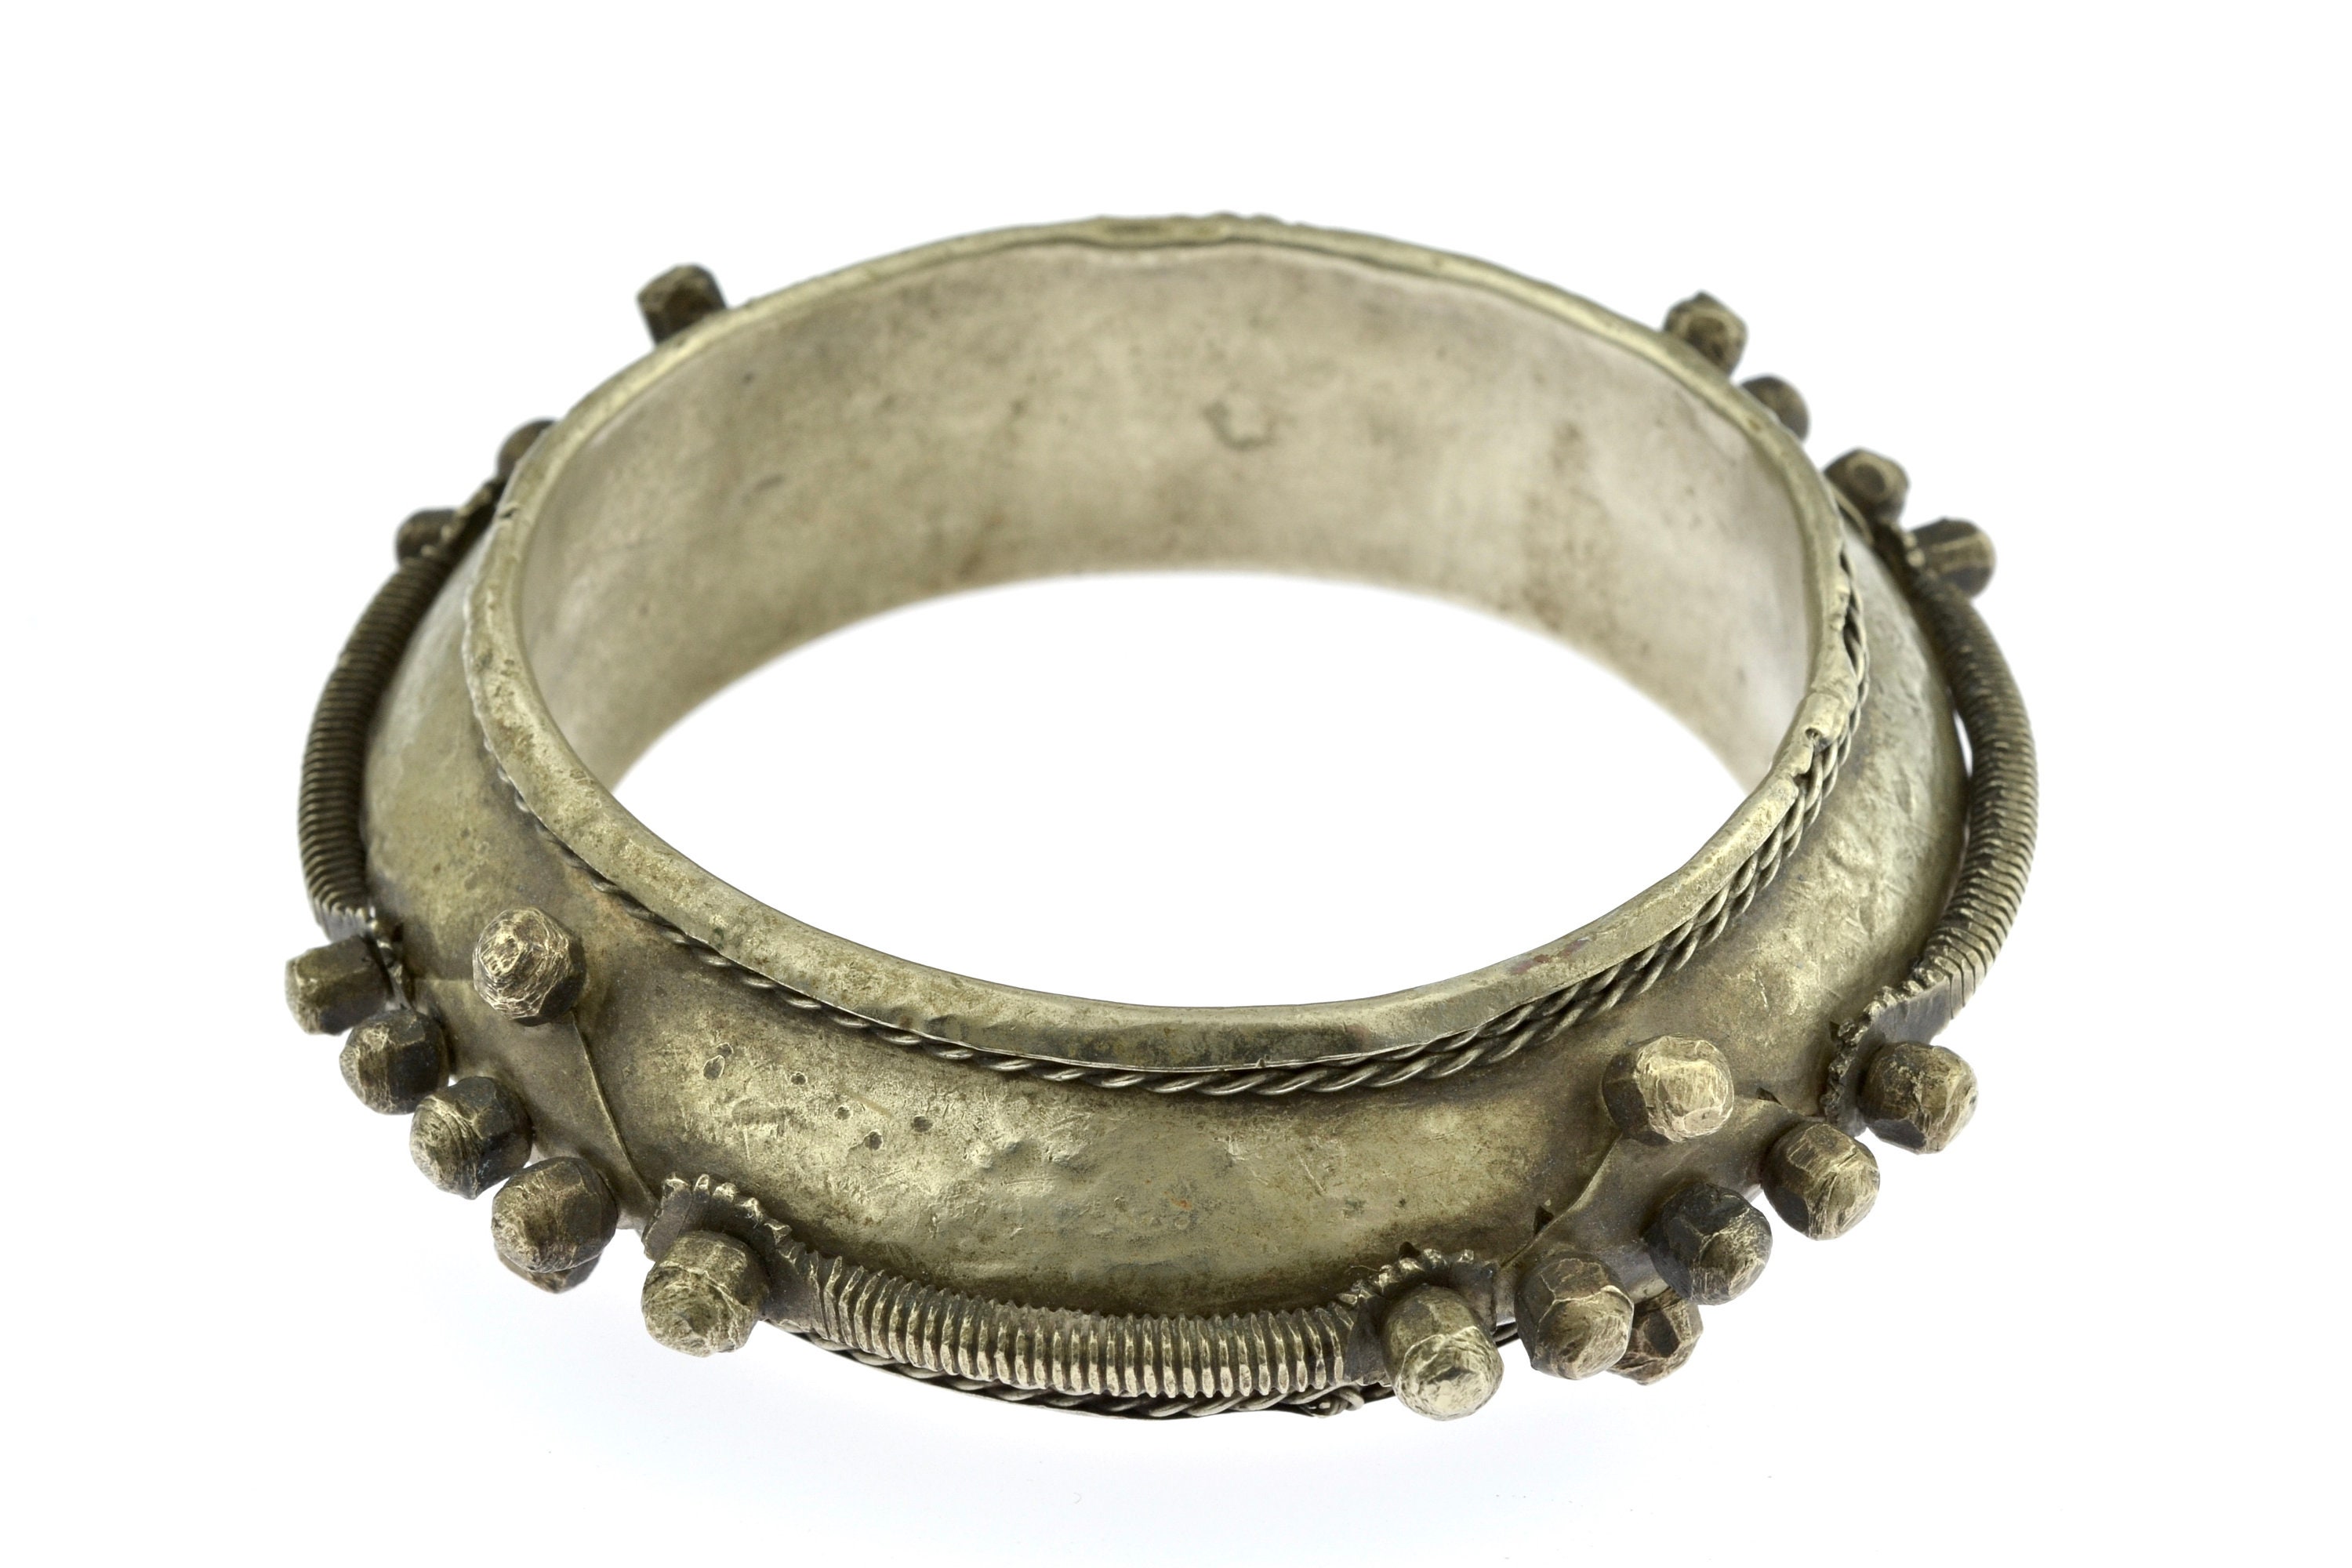 BRACELET Brand New Pure vintage antique tribal old silver link chain  bracelet handmade jewelry india at Rs 45 | New Items in Jaipur | ID:  19400261991